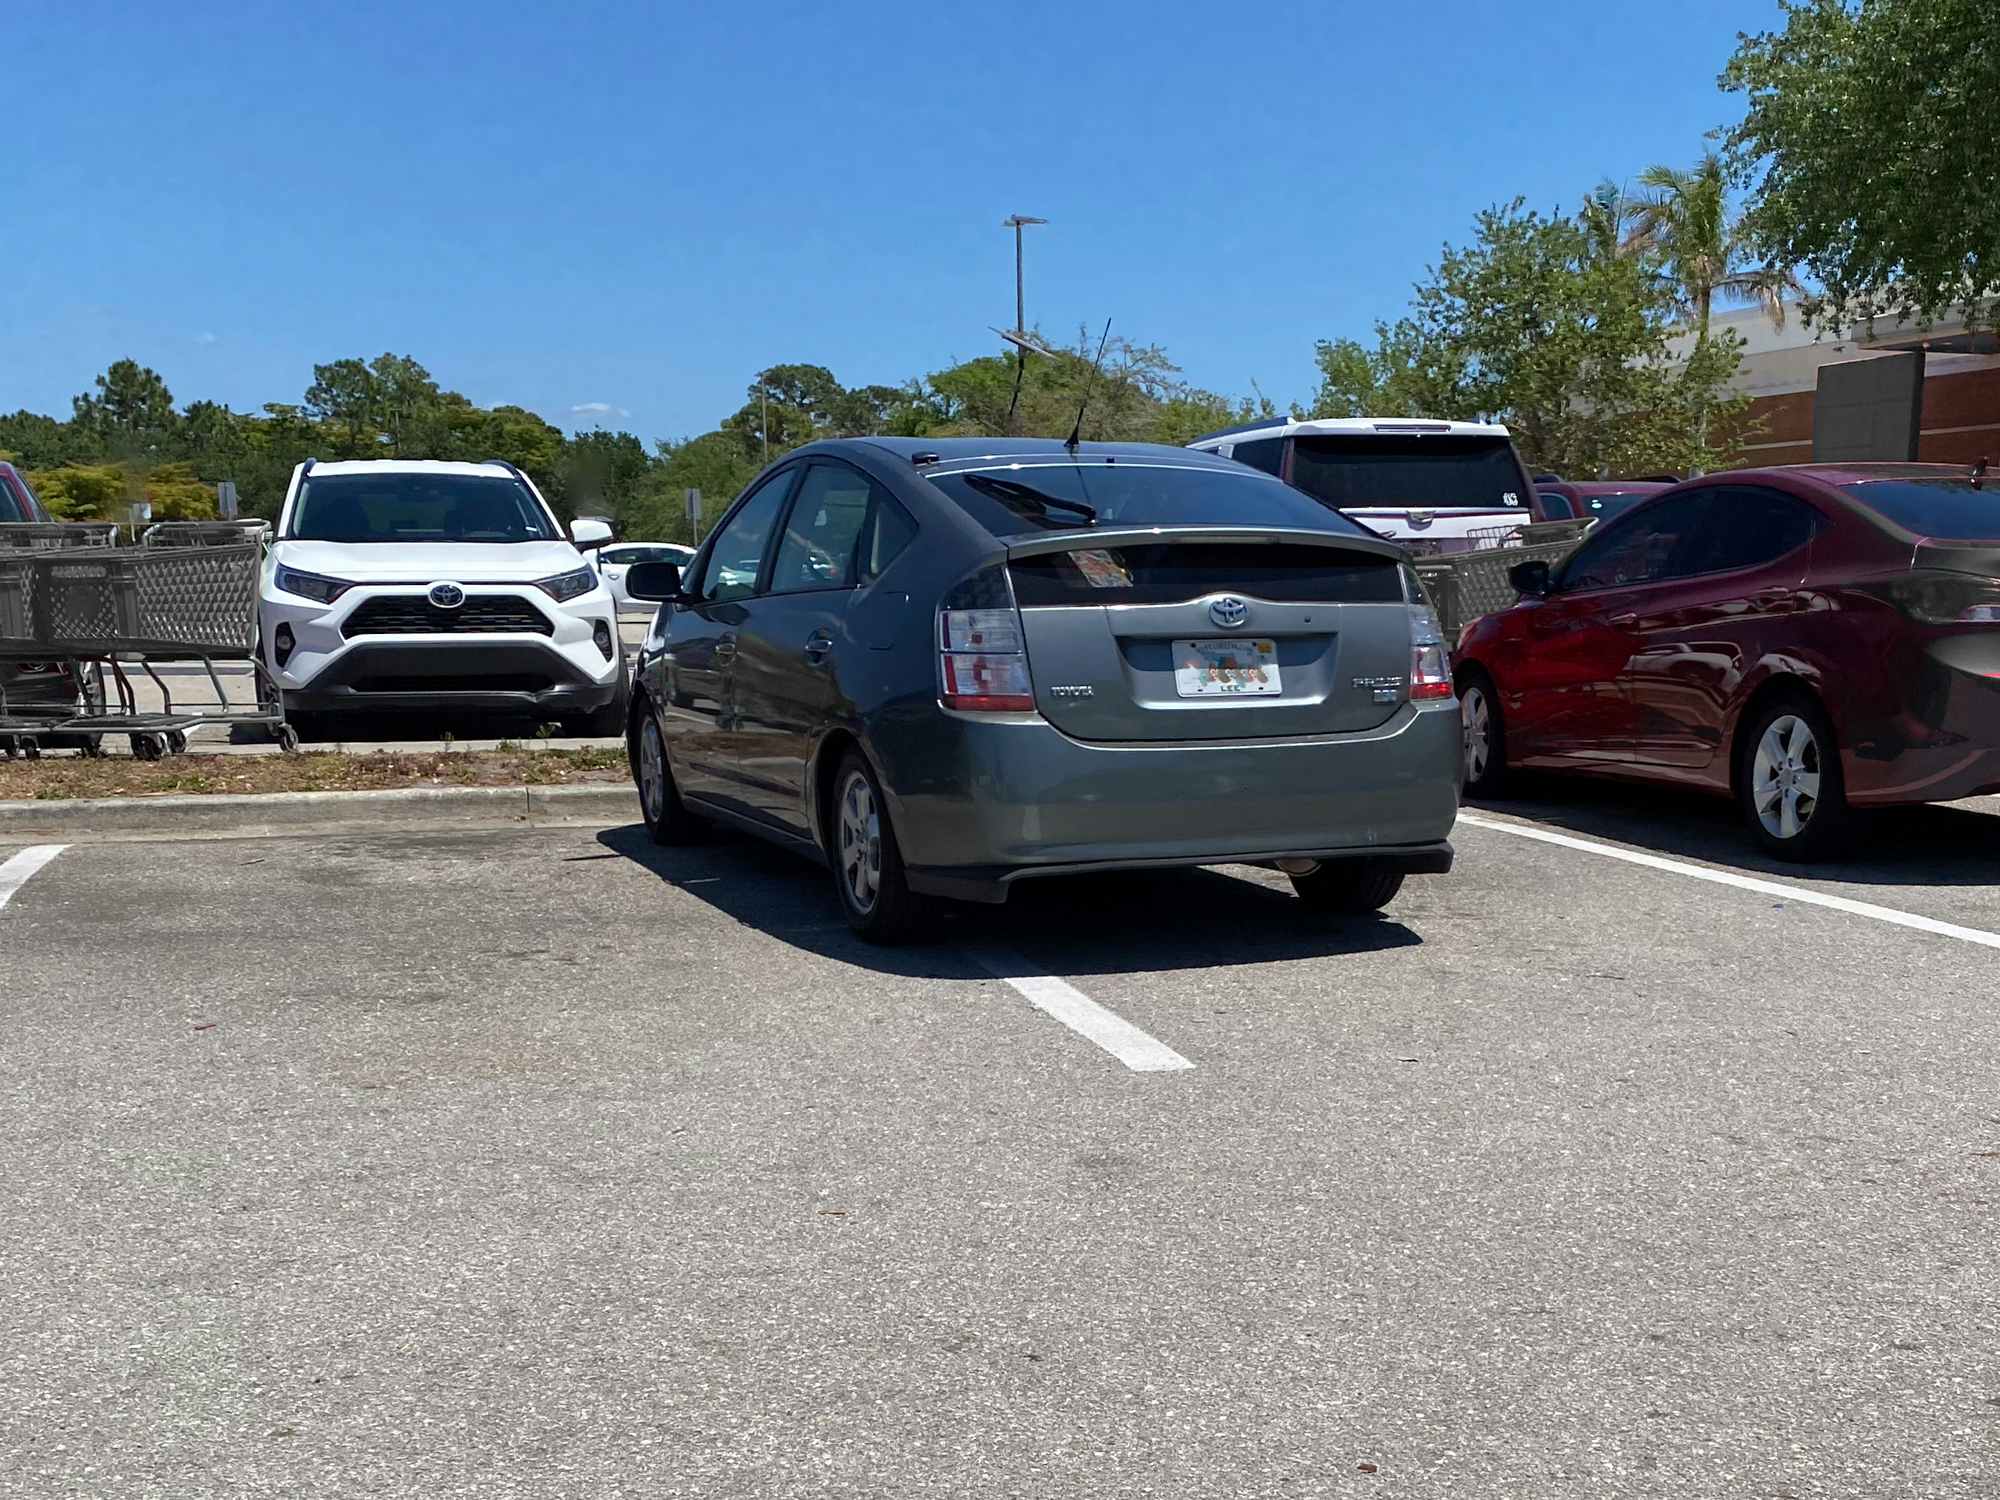 A car parked poorly in a parking lot